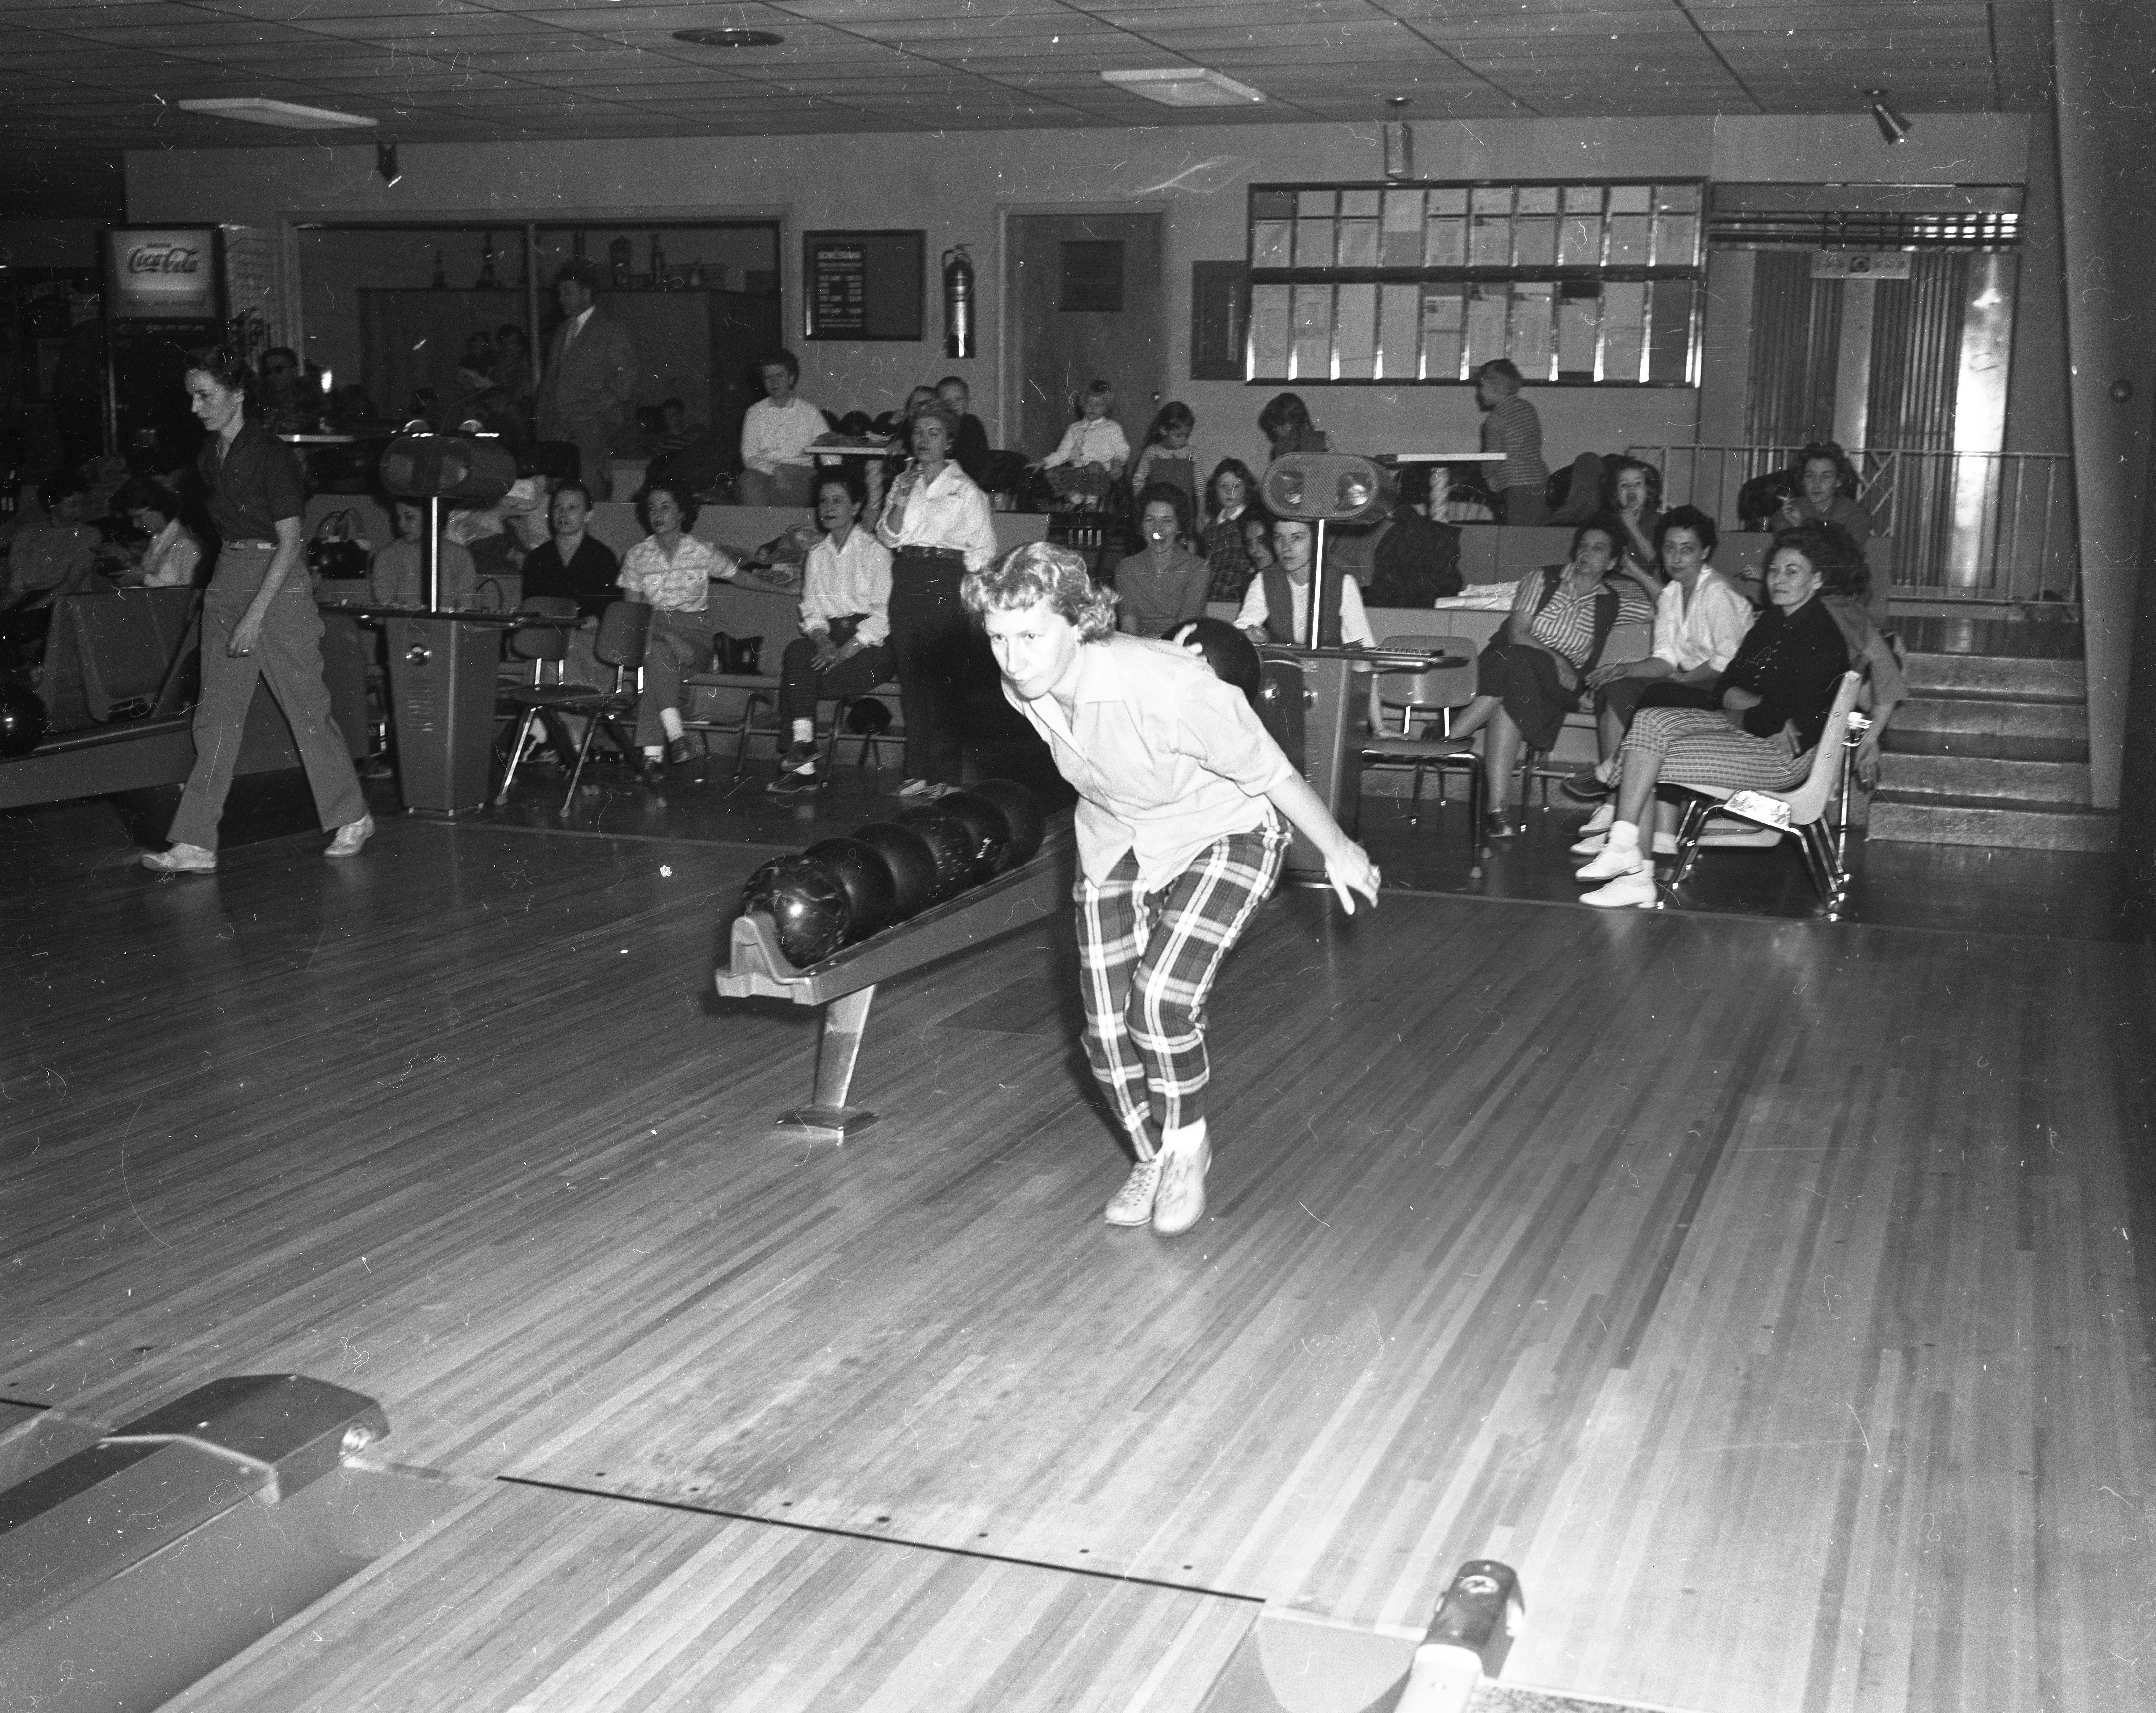 Convair employee in action at the bowling alley.